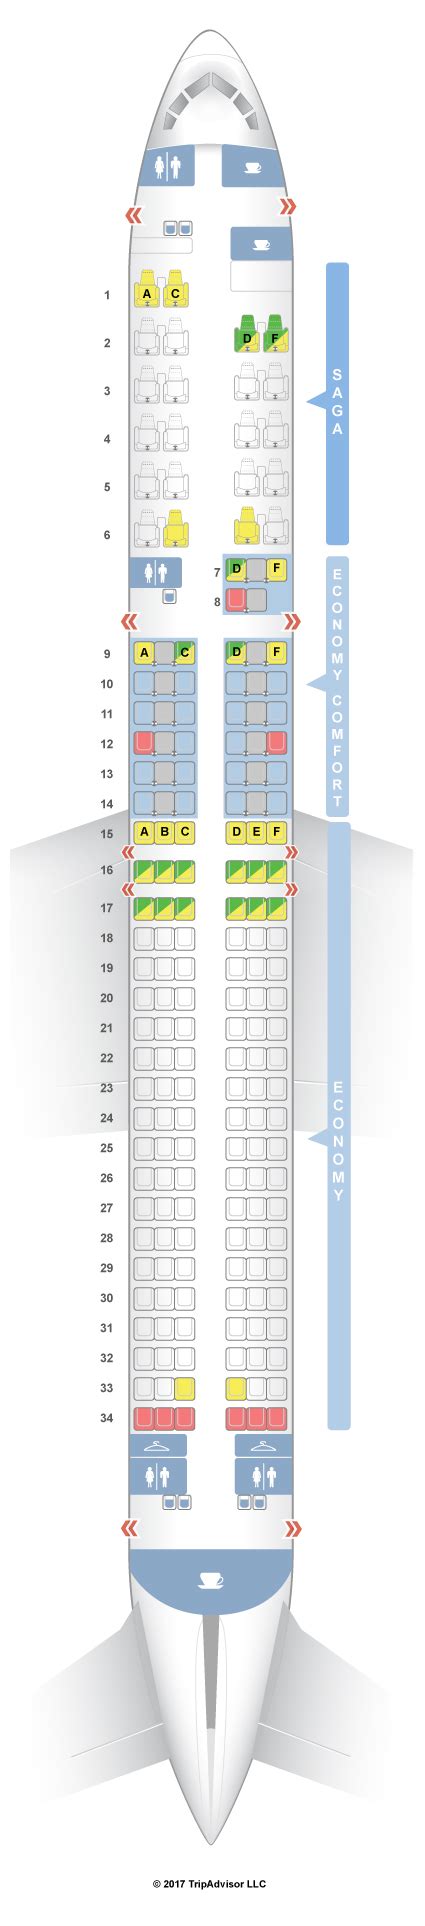 The Boeing 757-300 Icelandair Seating Chart is divided i